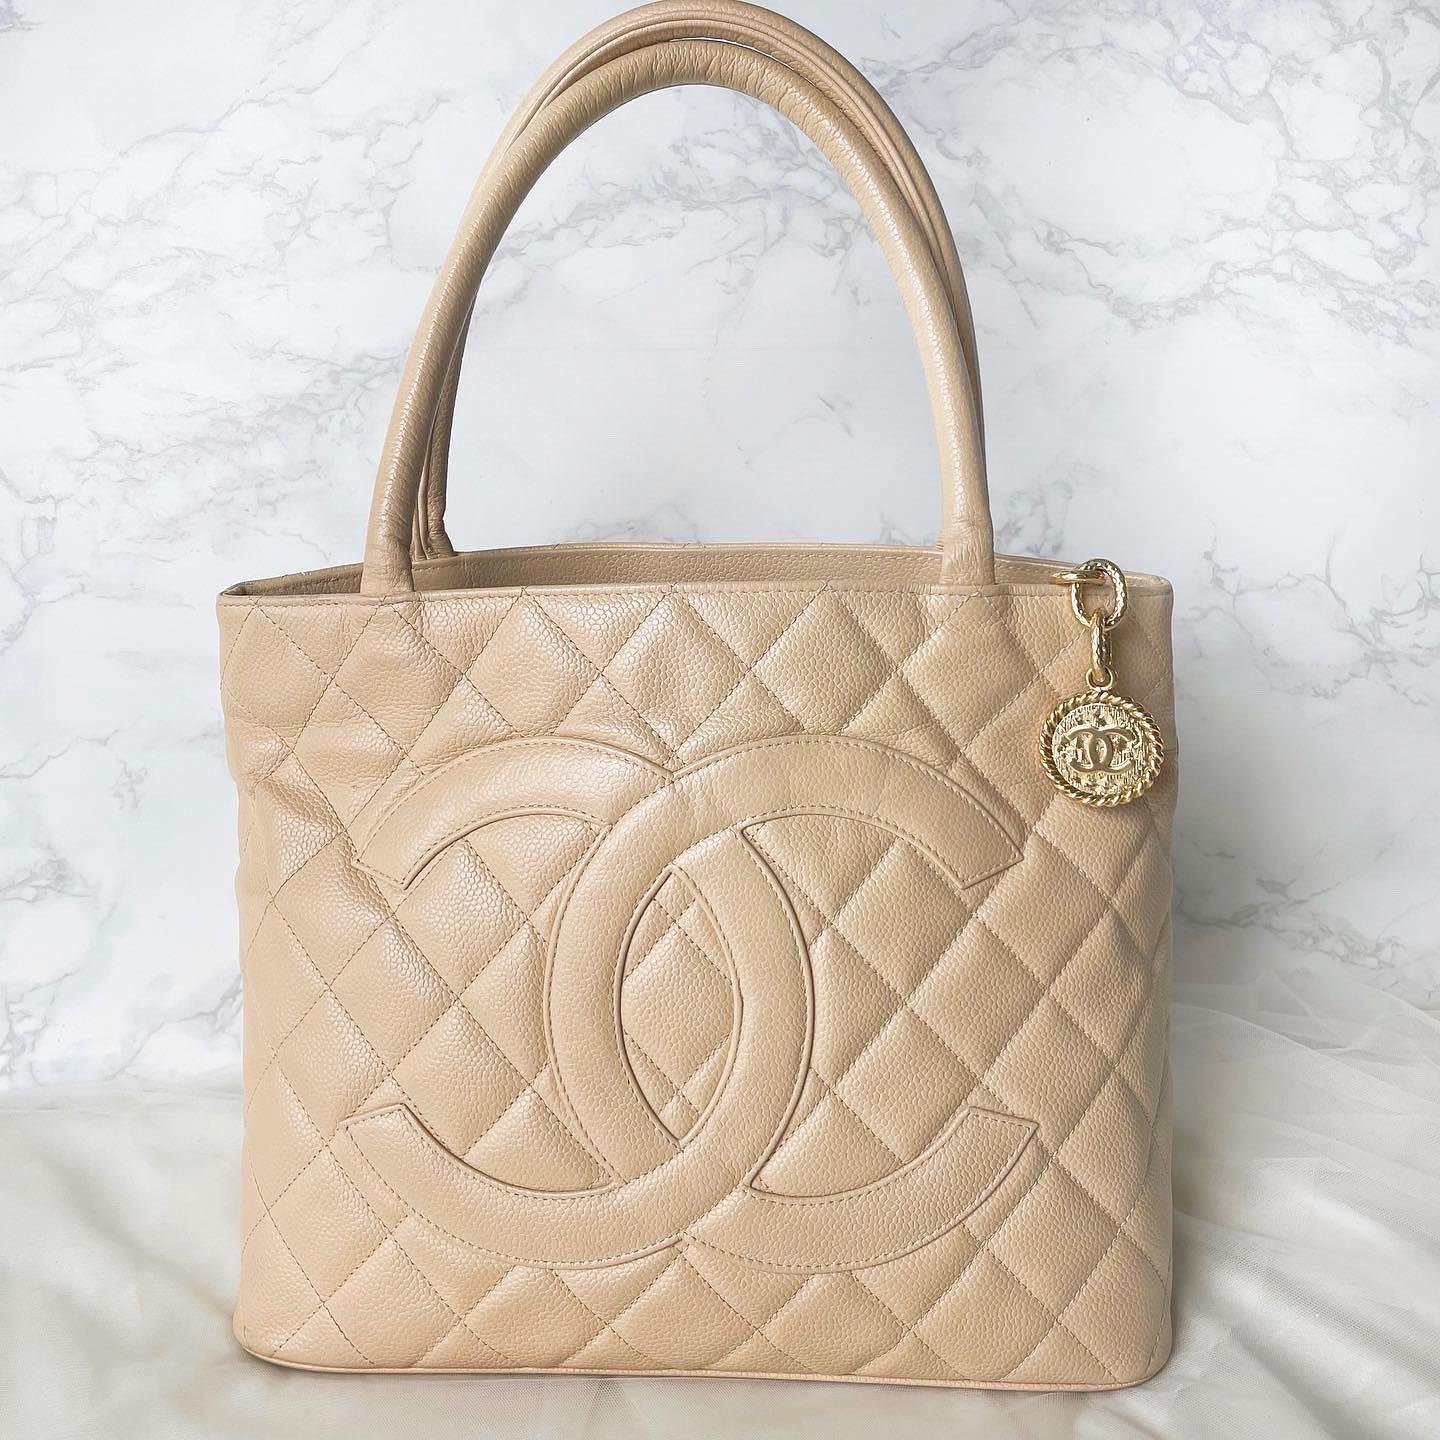 A PINK CAVIAR LEATHER MEDALLION TOTE BAG, CHANEL, 2004-2005